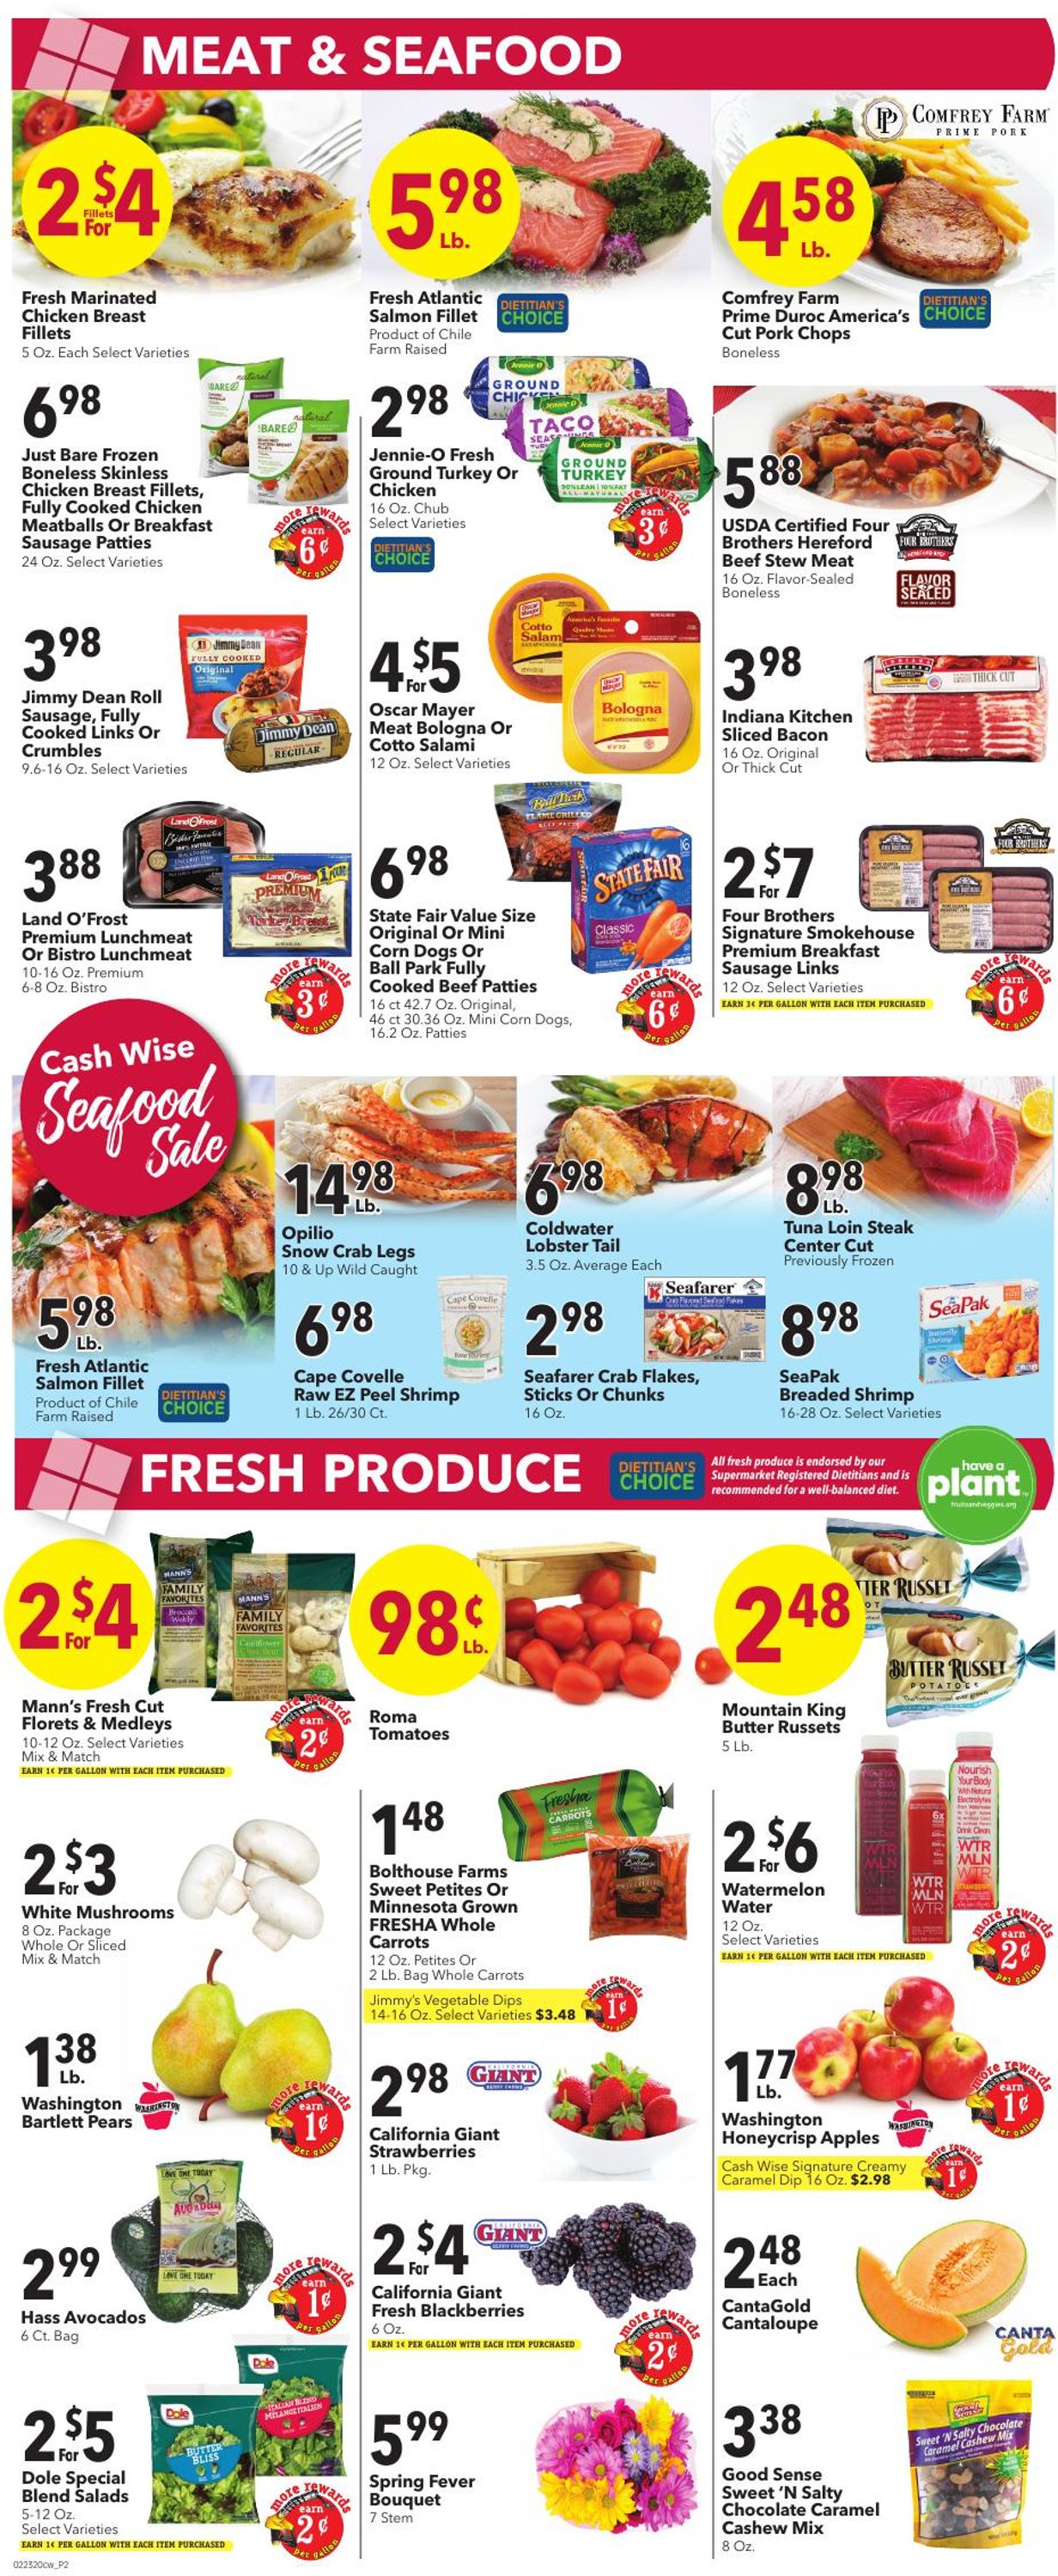 Cash Wise Weekly Ad Circular - valid 02/26-03/03/2020 (Page 2)